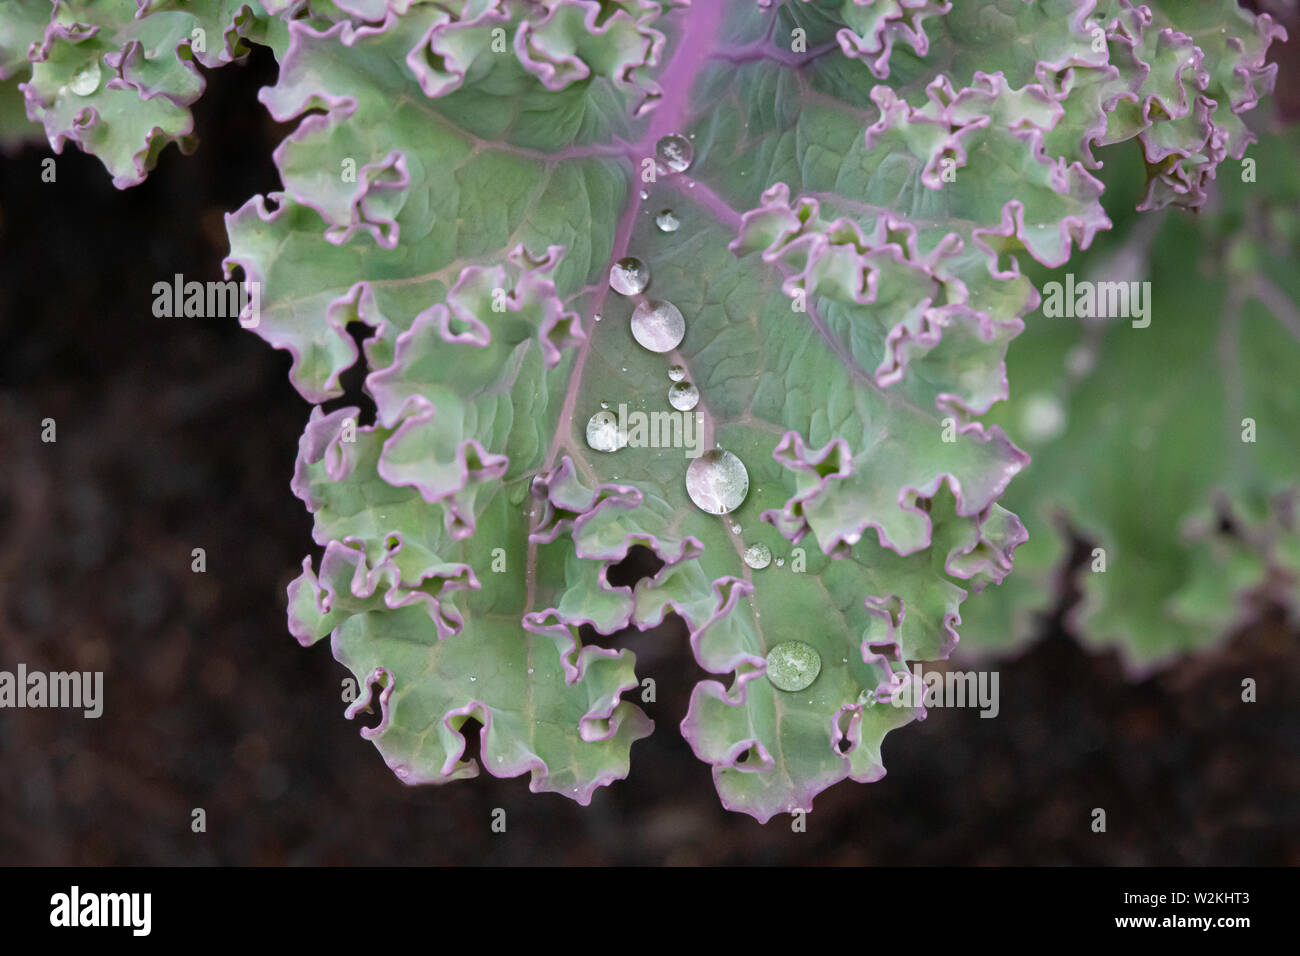 High surface tension on a kale leaf beads water, aka: the lotus effect Stock Photo